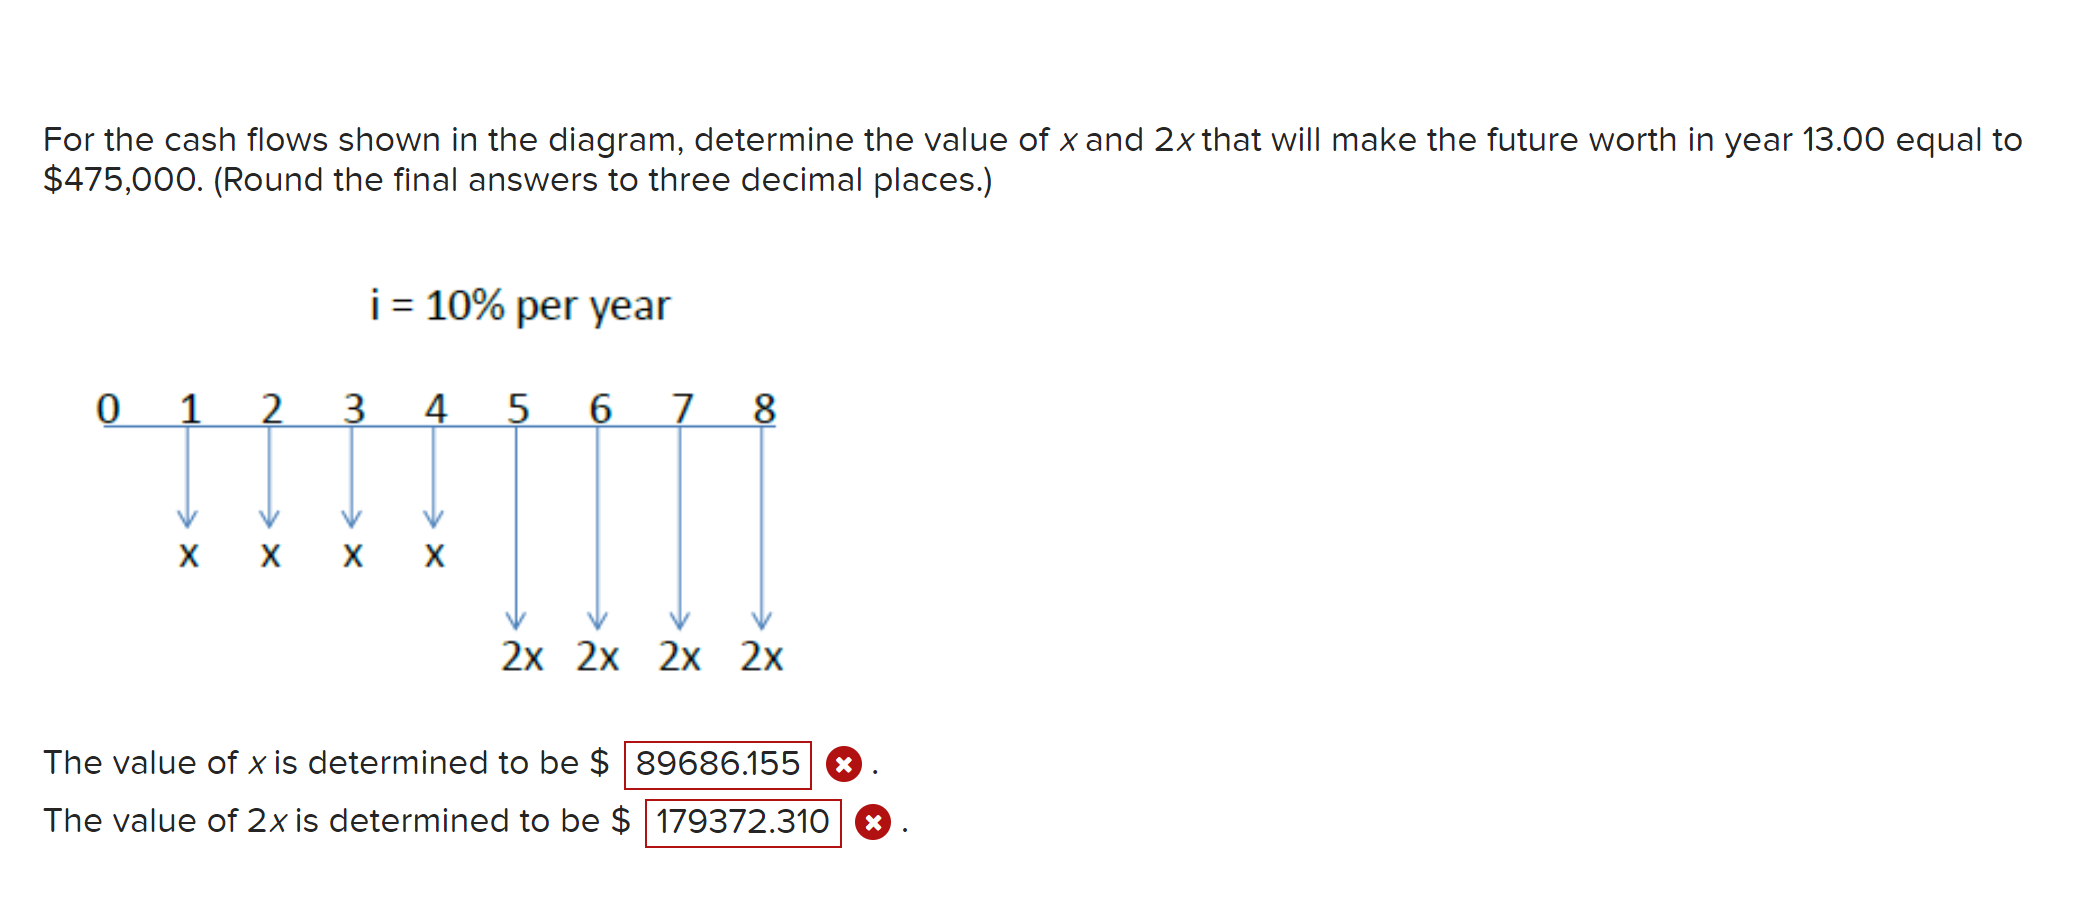 For the cash flows shown in the diagram, determine the value of x and 2x that will make the future worth in